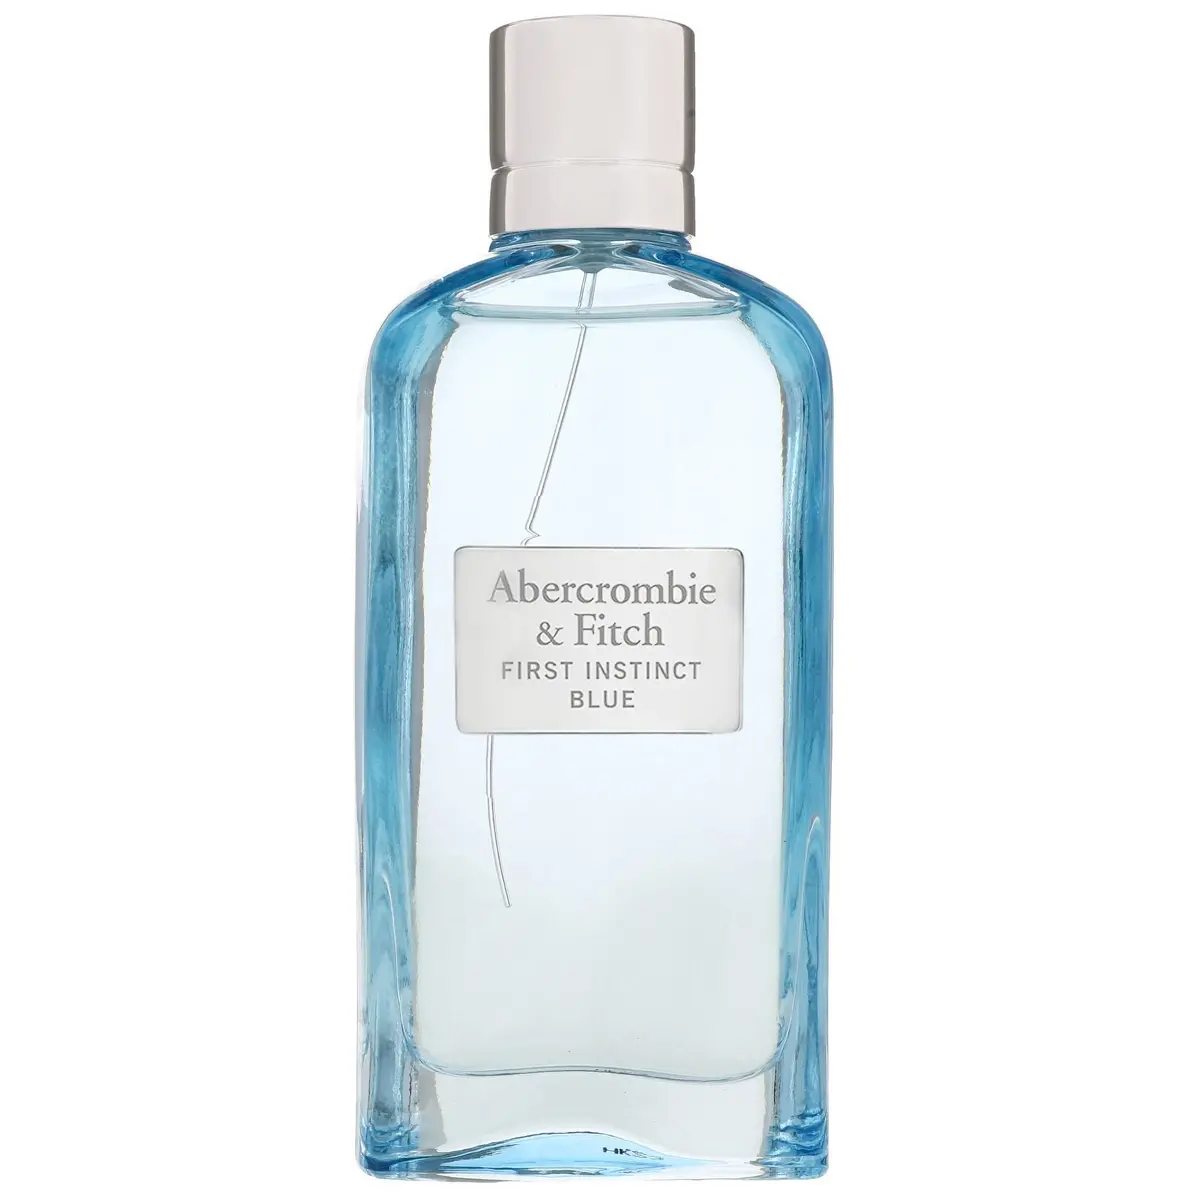 Abercrombie fitch first instinct blue. Abercrombie Fitch first Instinct for her 30ml жен. First Instinct Blue for her Abercrombie & Fitch. Abercrombie and Fitch first Instinct Blue for him 50 мл.